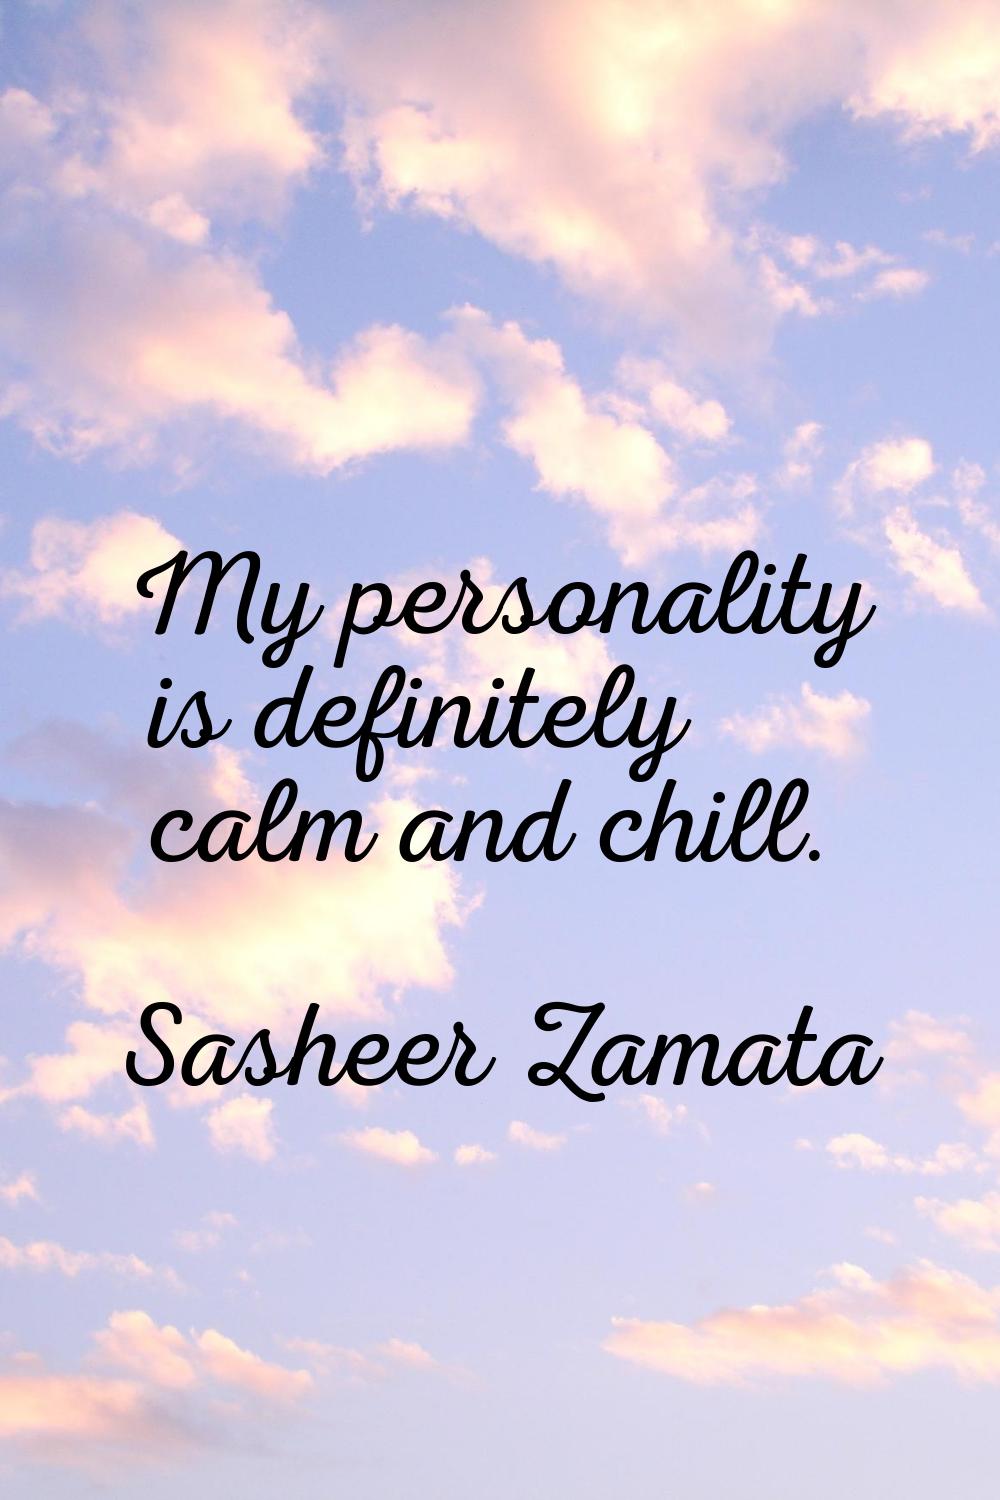 My personality is definitely calm and chill.